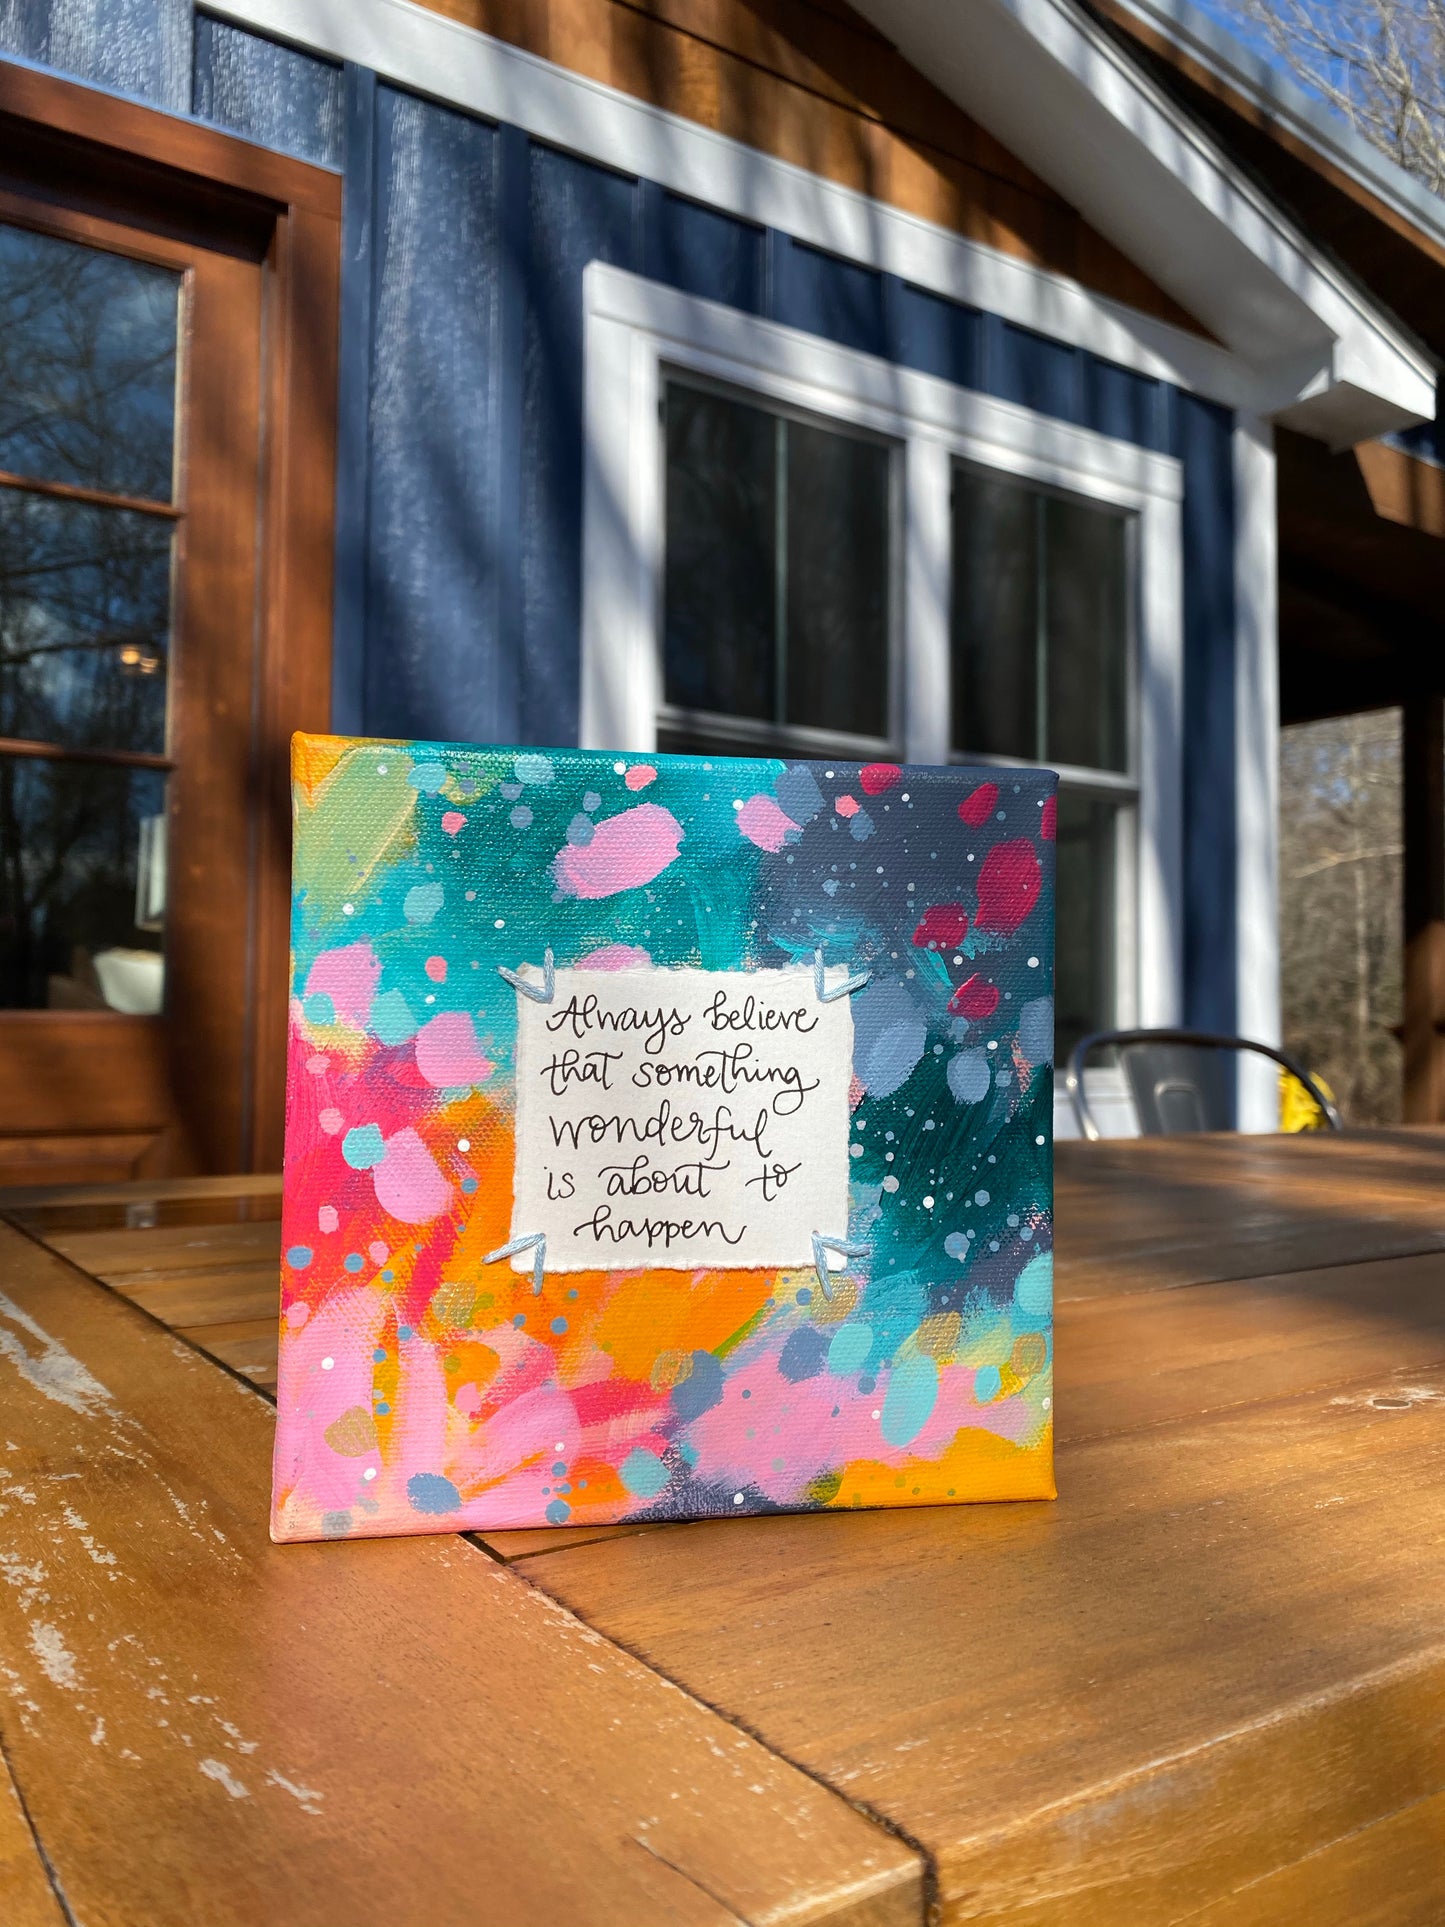 Something Wonderful 6x6 inch original abstract canvas with embroidery thread accents